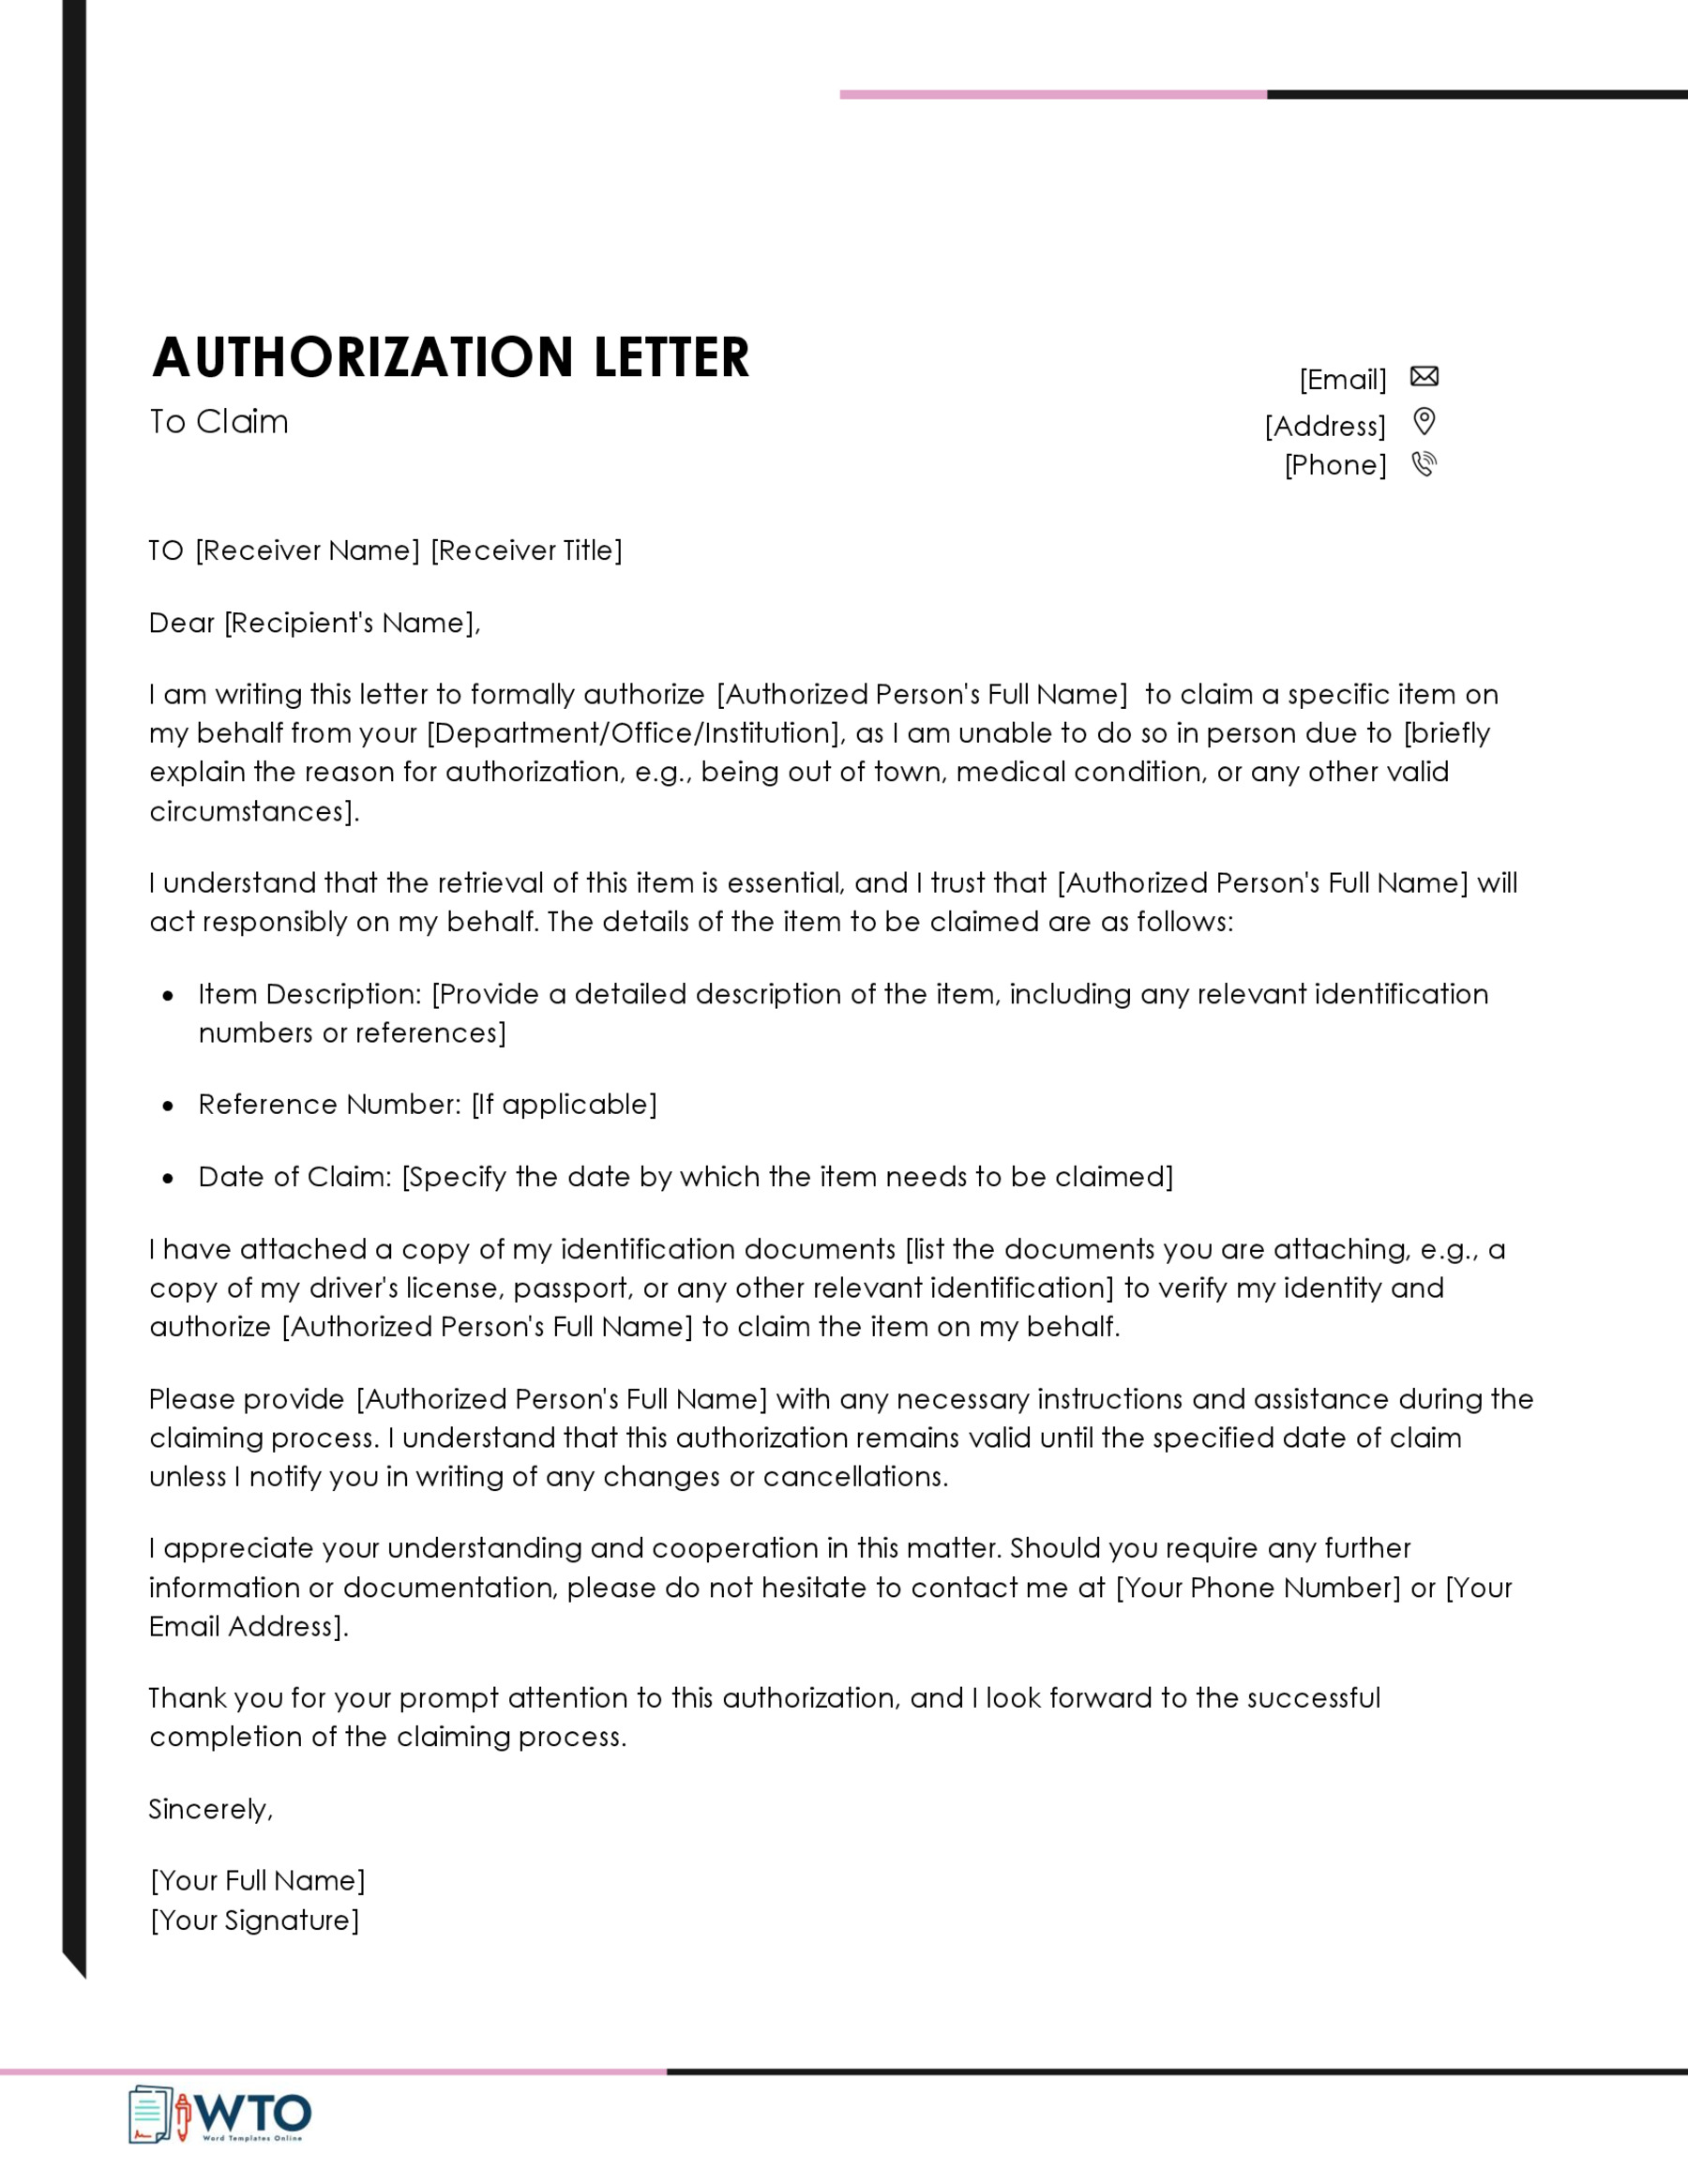 Authorization Letter to Claim Template in ms word free download